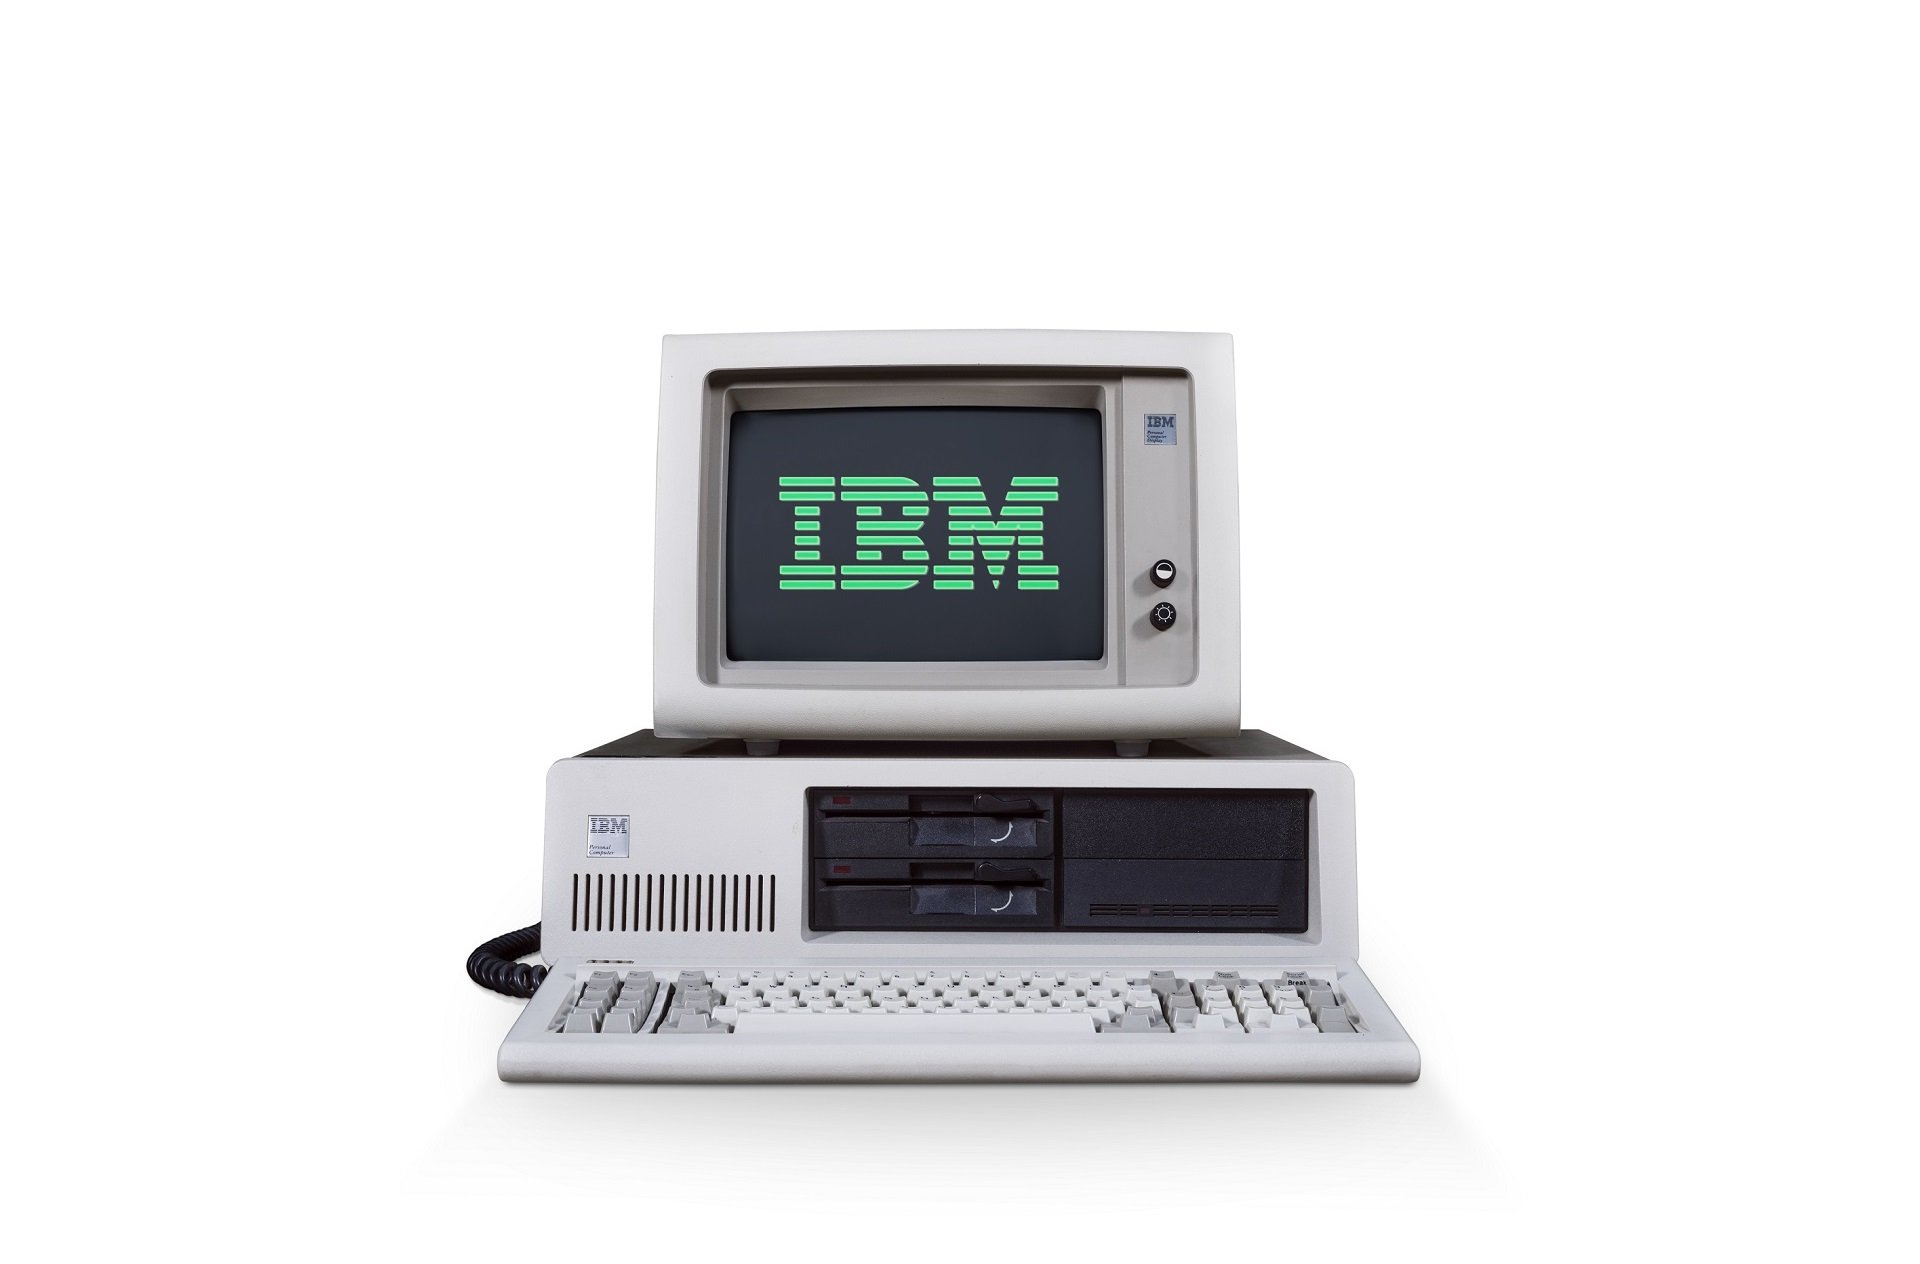 A picture of the IBM PC with IBM’s logo displayed on the screen.